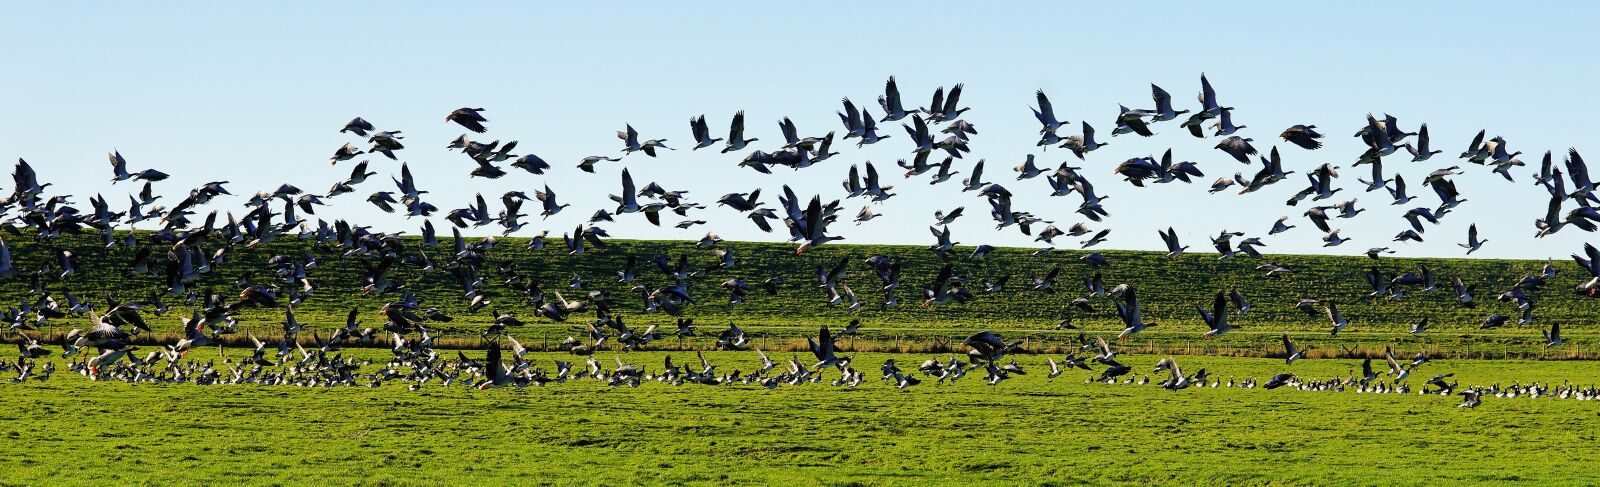 Sony a99 II sample photo. Birds, geese, flock of photography